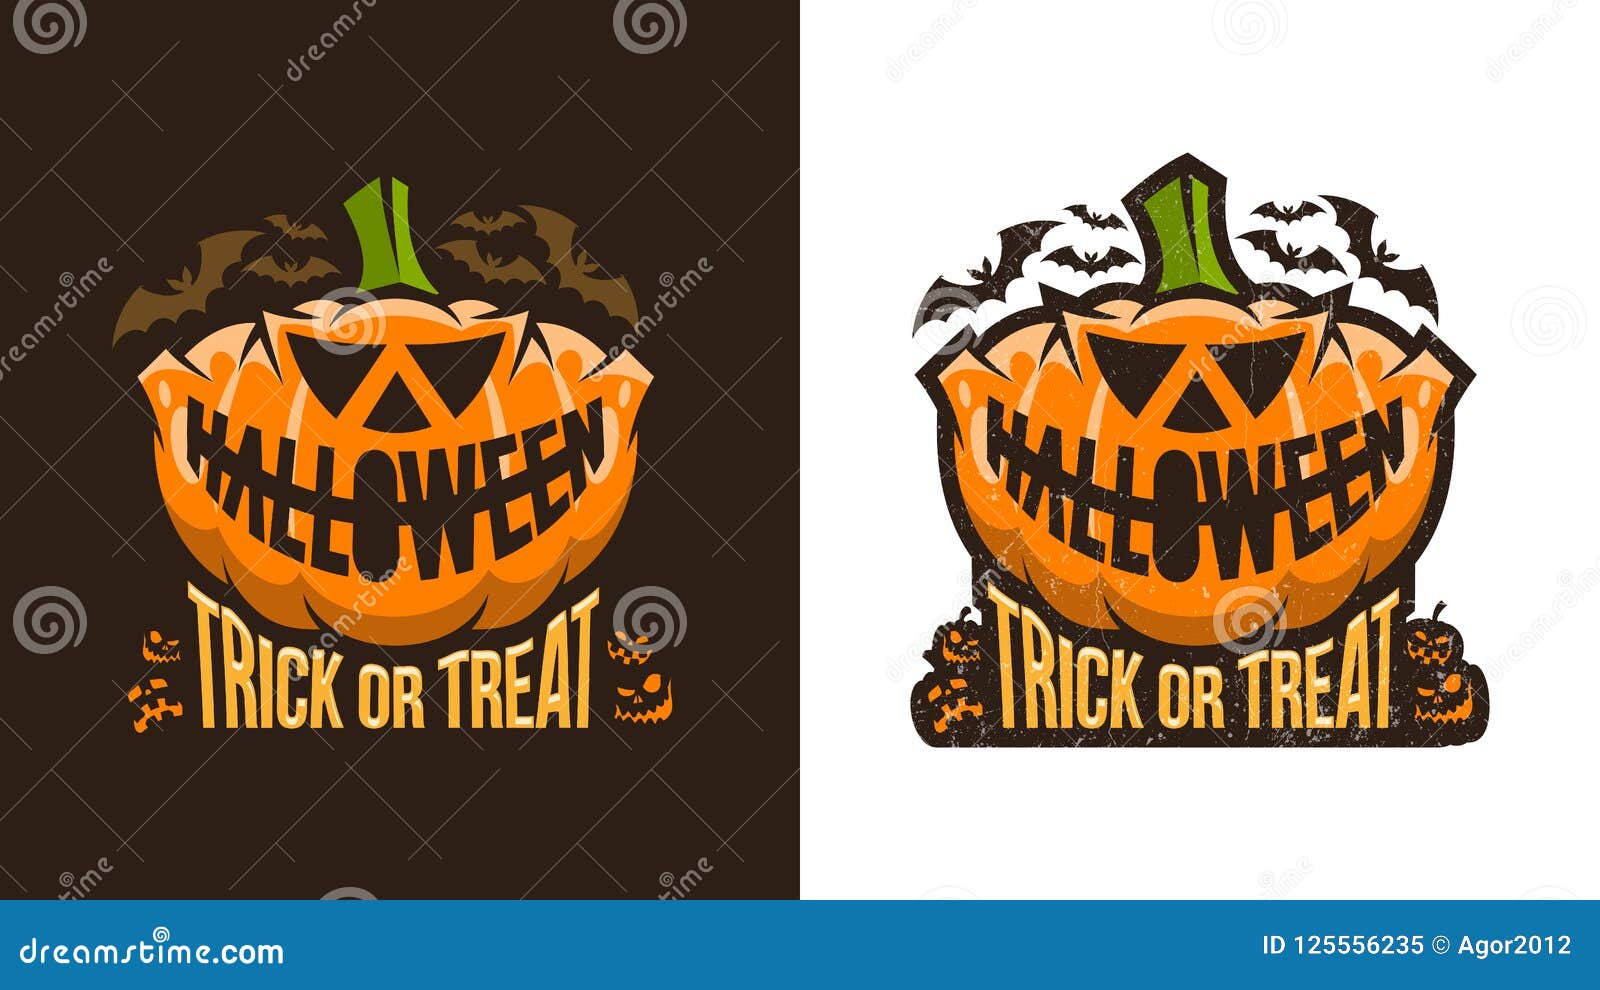 Premium Vector  Halloween vampire cartoon with pumpkin mask at night  design, holiday and scary theme illustration